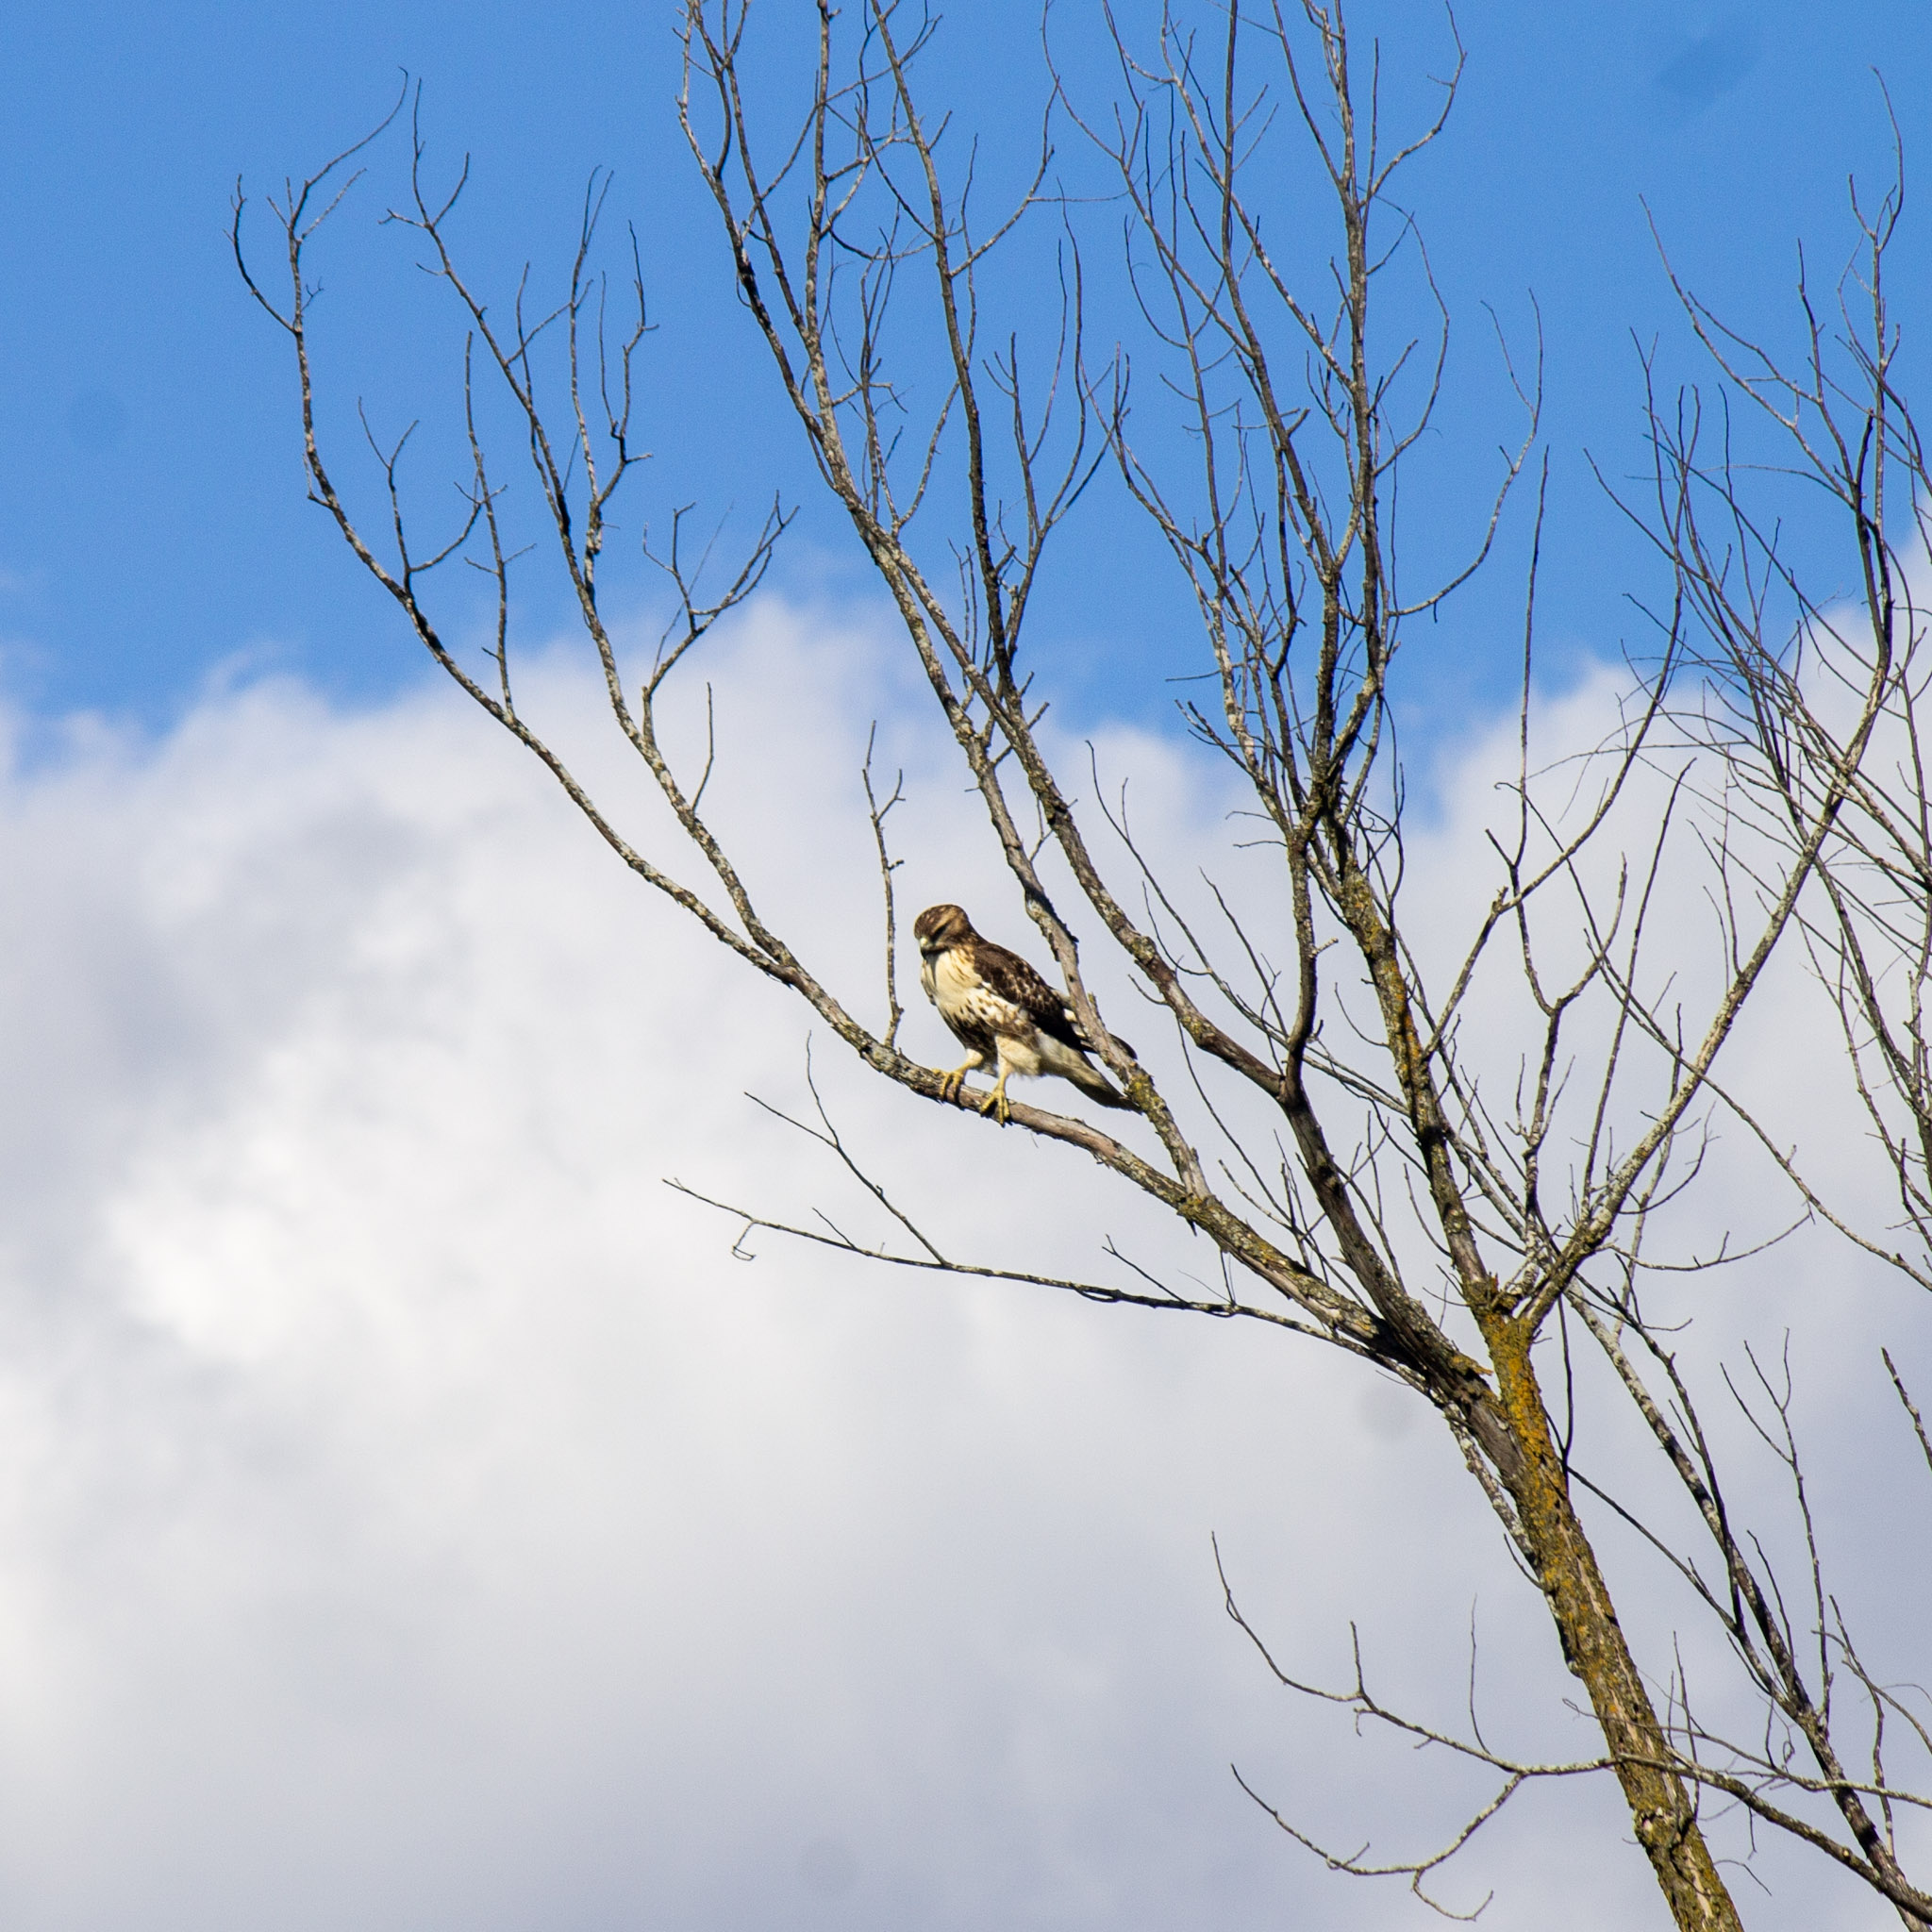 A red-tailed hawk sitting in the bare branches of a tree